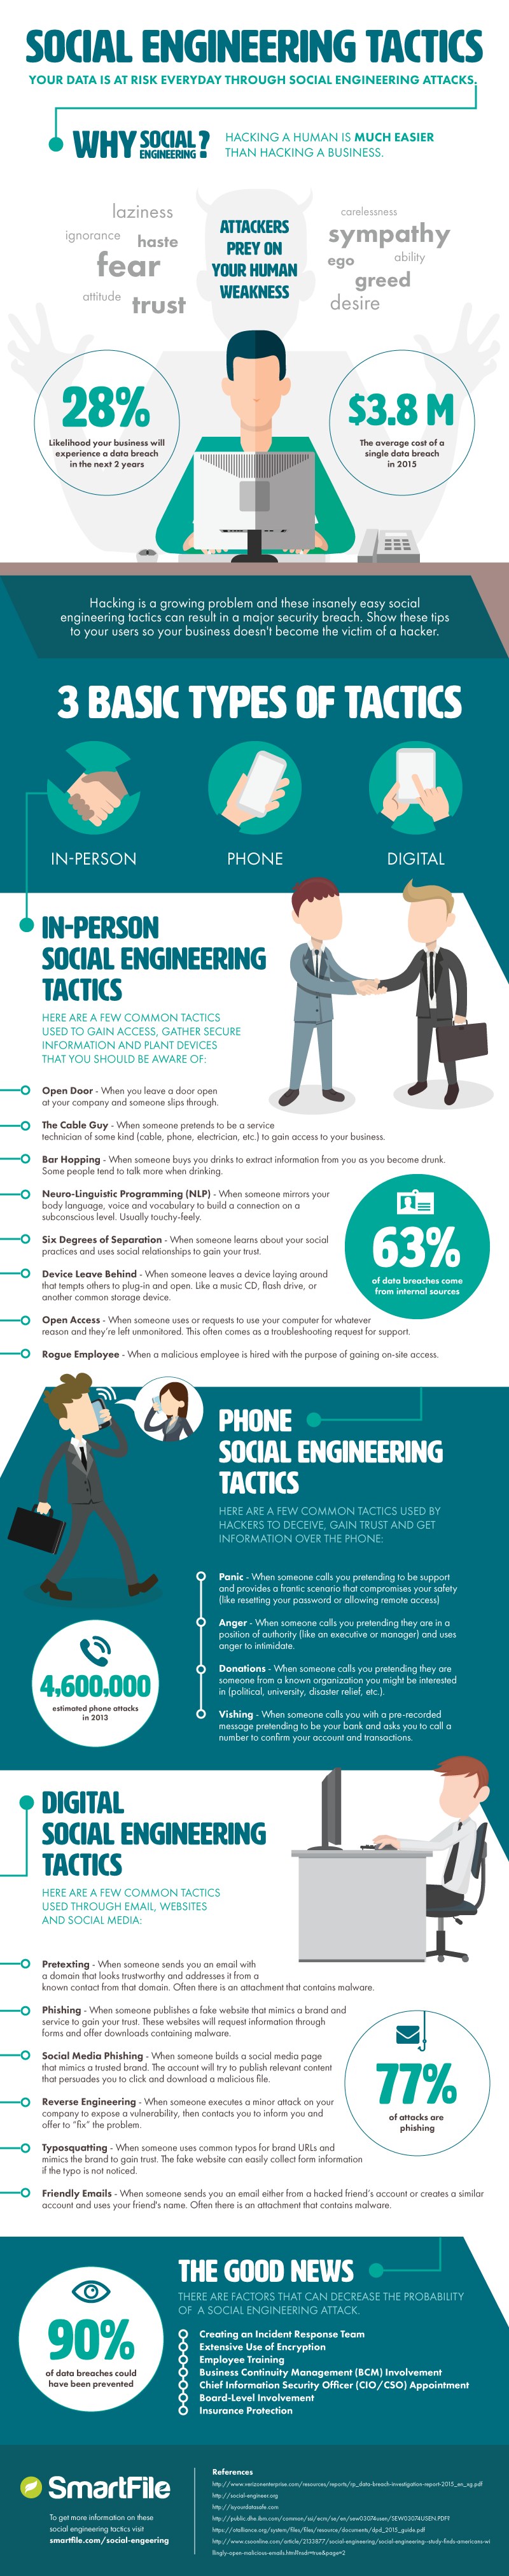 Social enginerring infographic